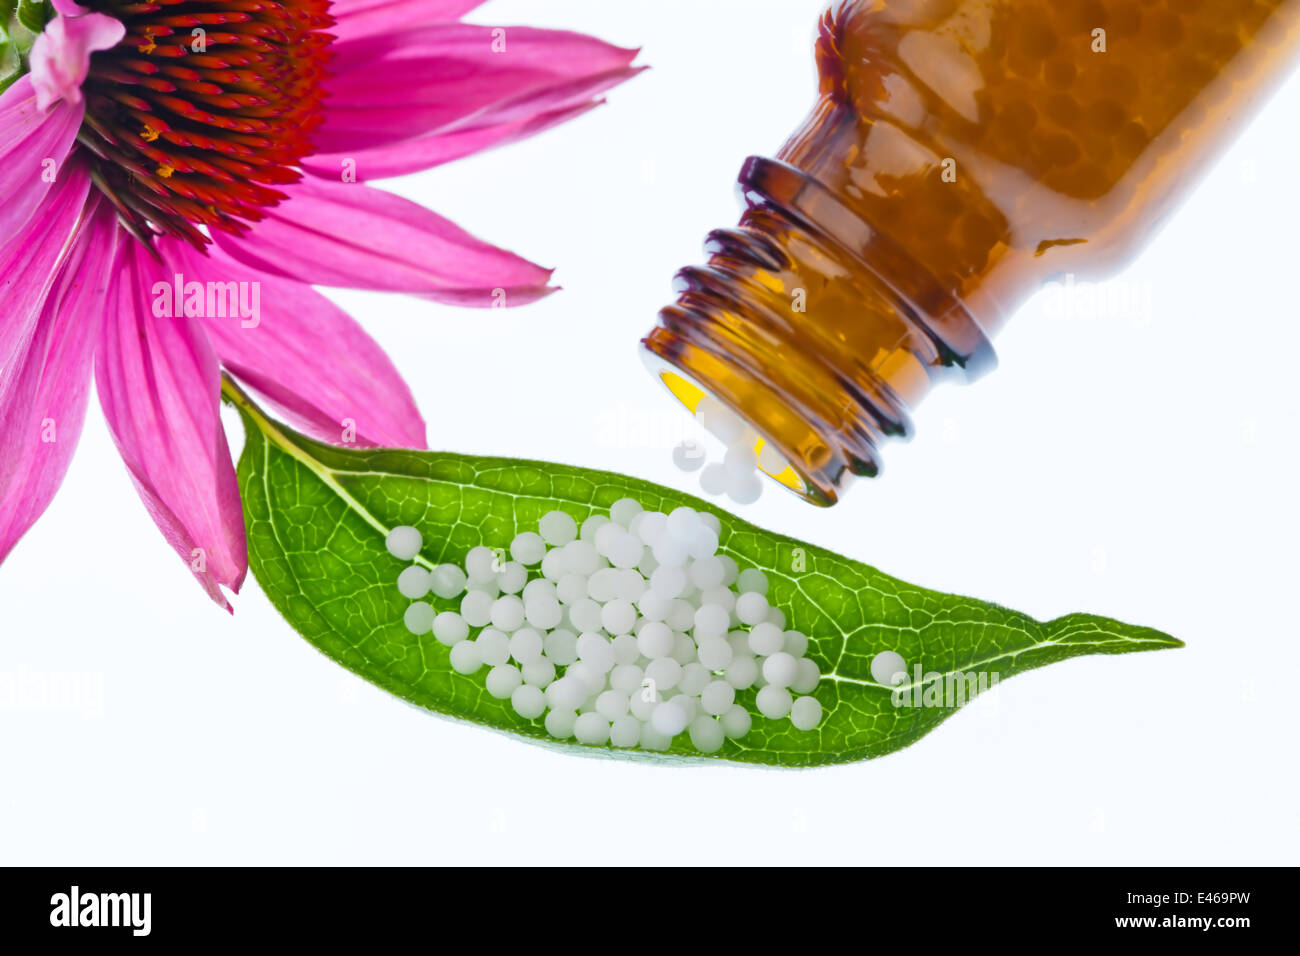 Globules in the treatment of diseases in the gentle, alternative medicine. Tablets and medicines. Stock Photo